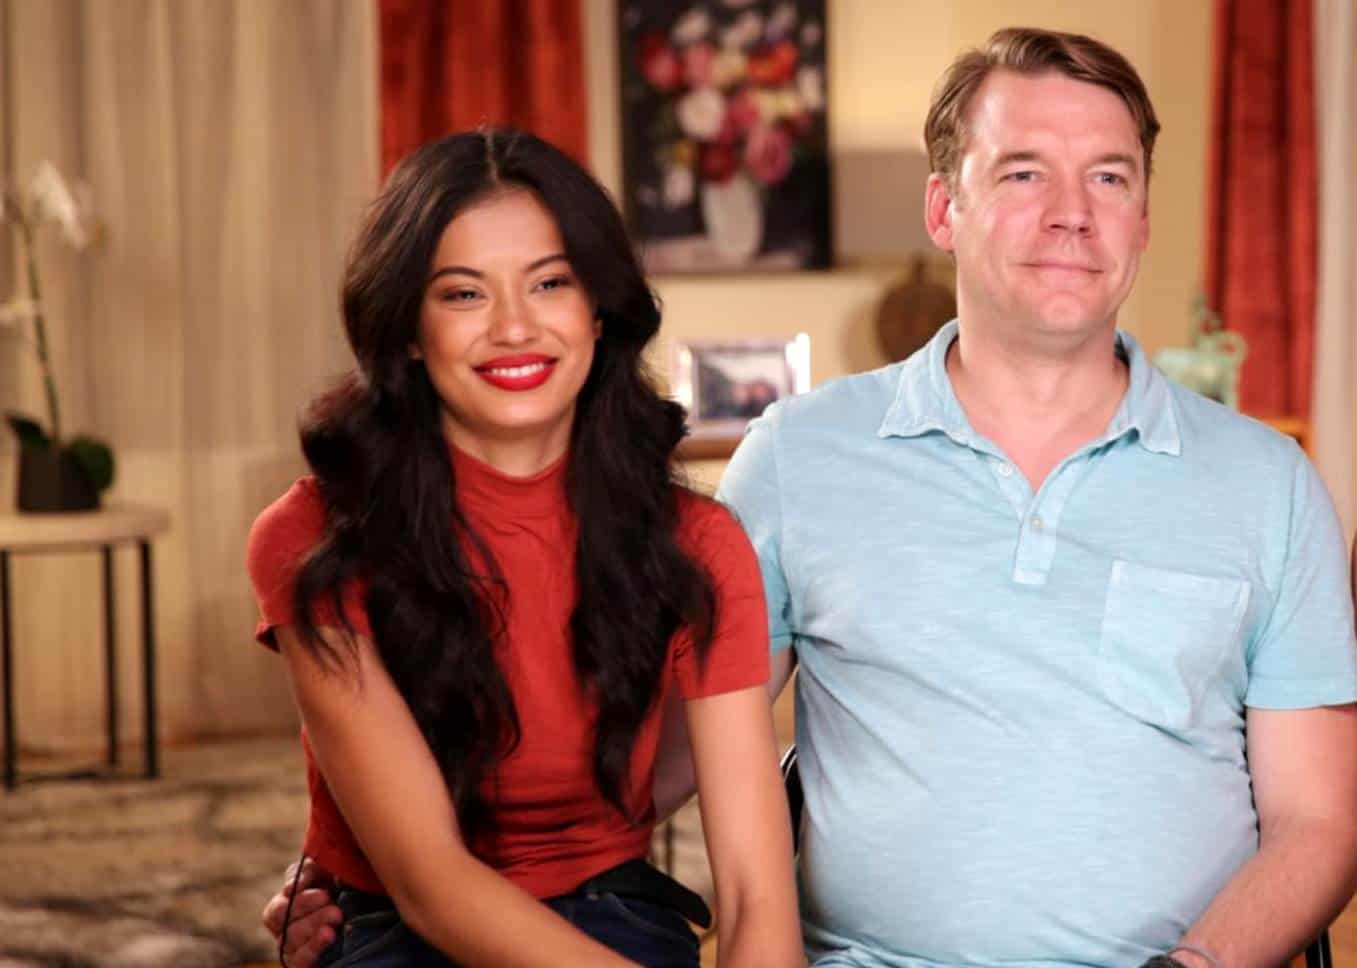 Are 90 Day Fiancé's Michael Jessen and Juliana Custodio Still Together? Find Out If They Got Married